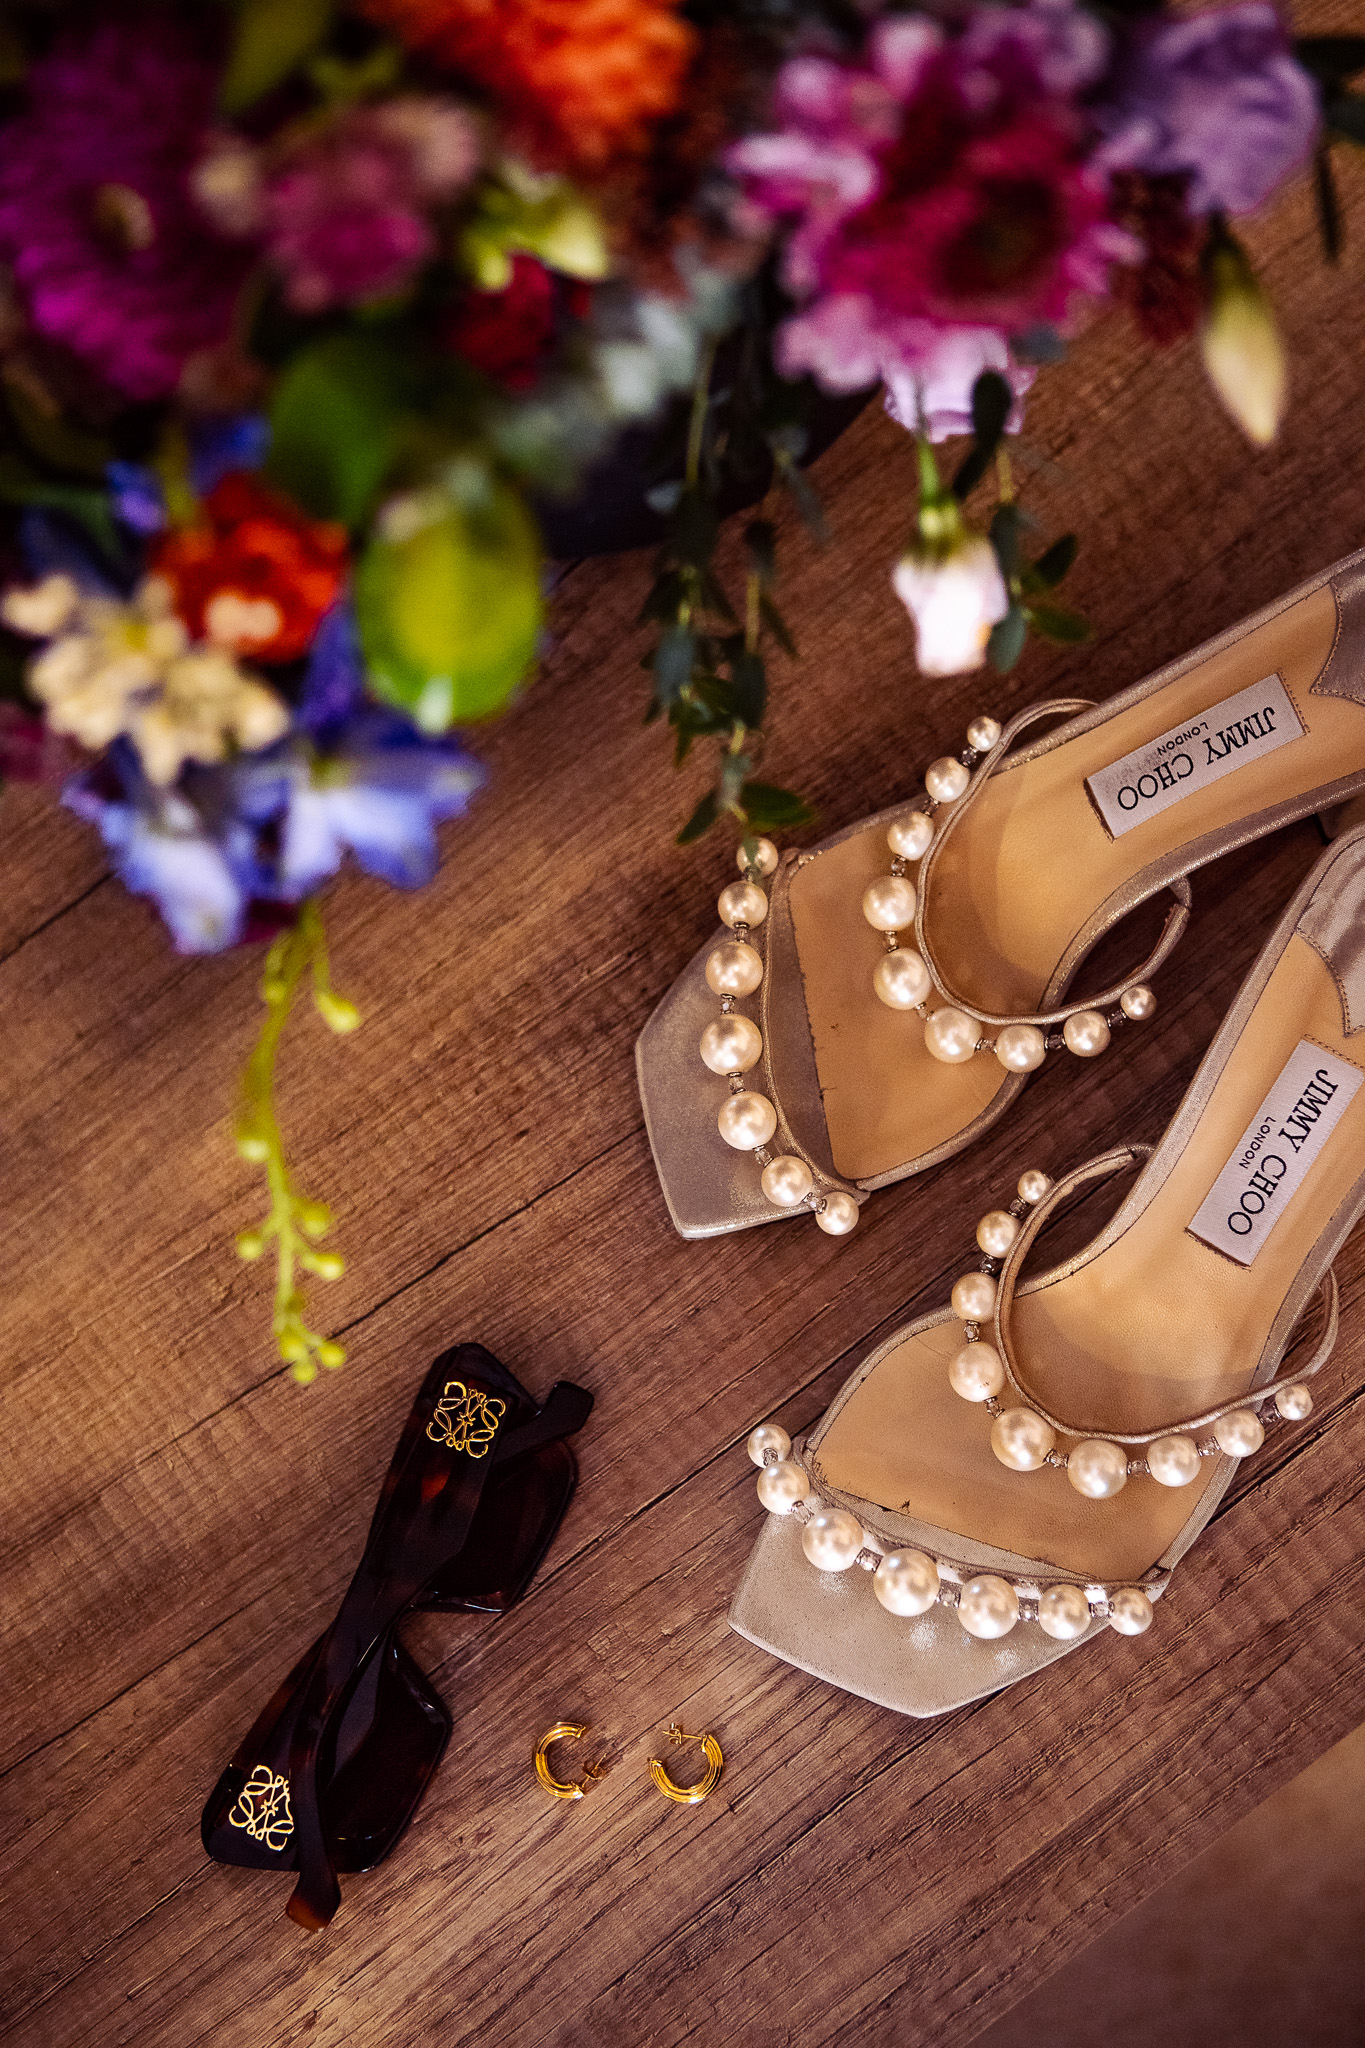 Jimmy Choo bridal shoes with wedding bouquet and accessories.